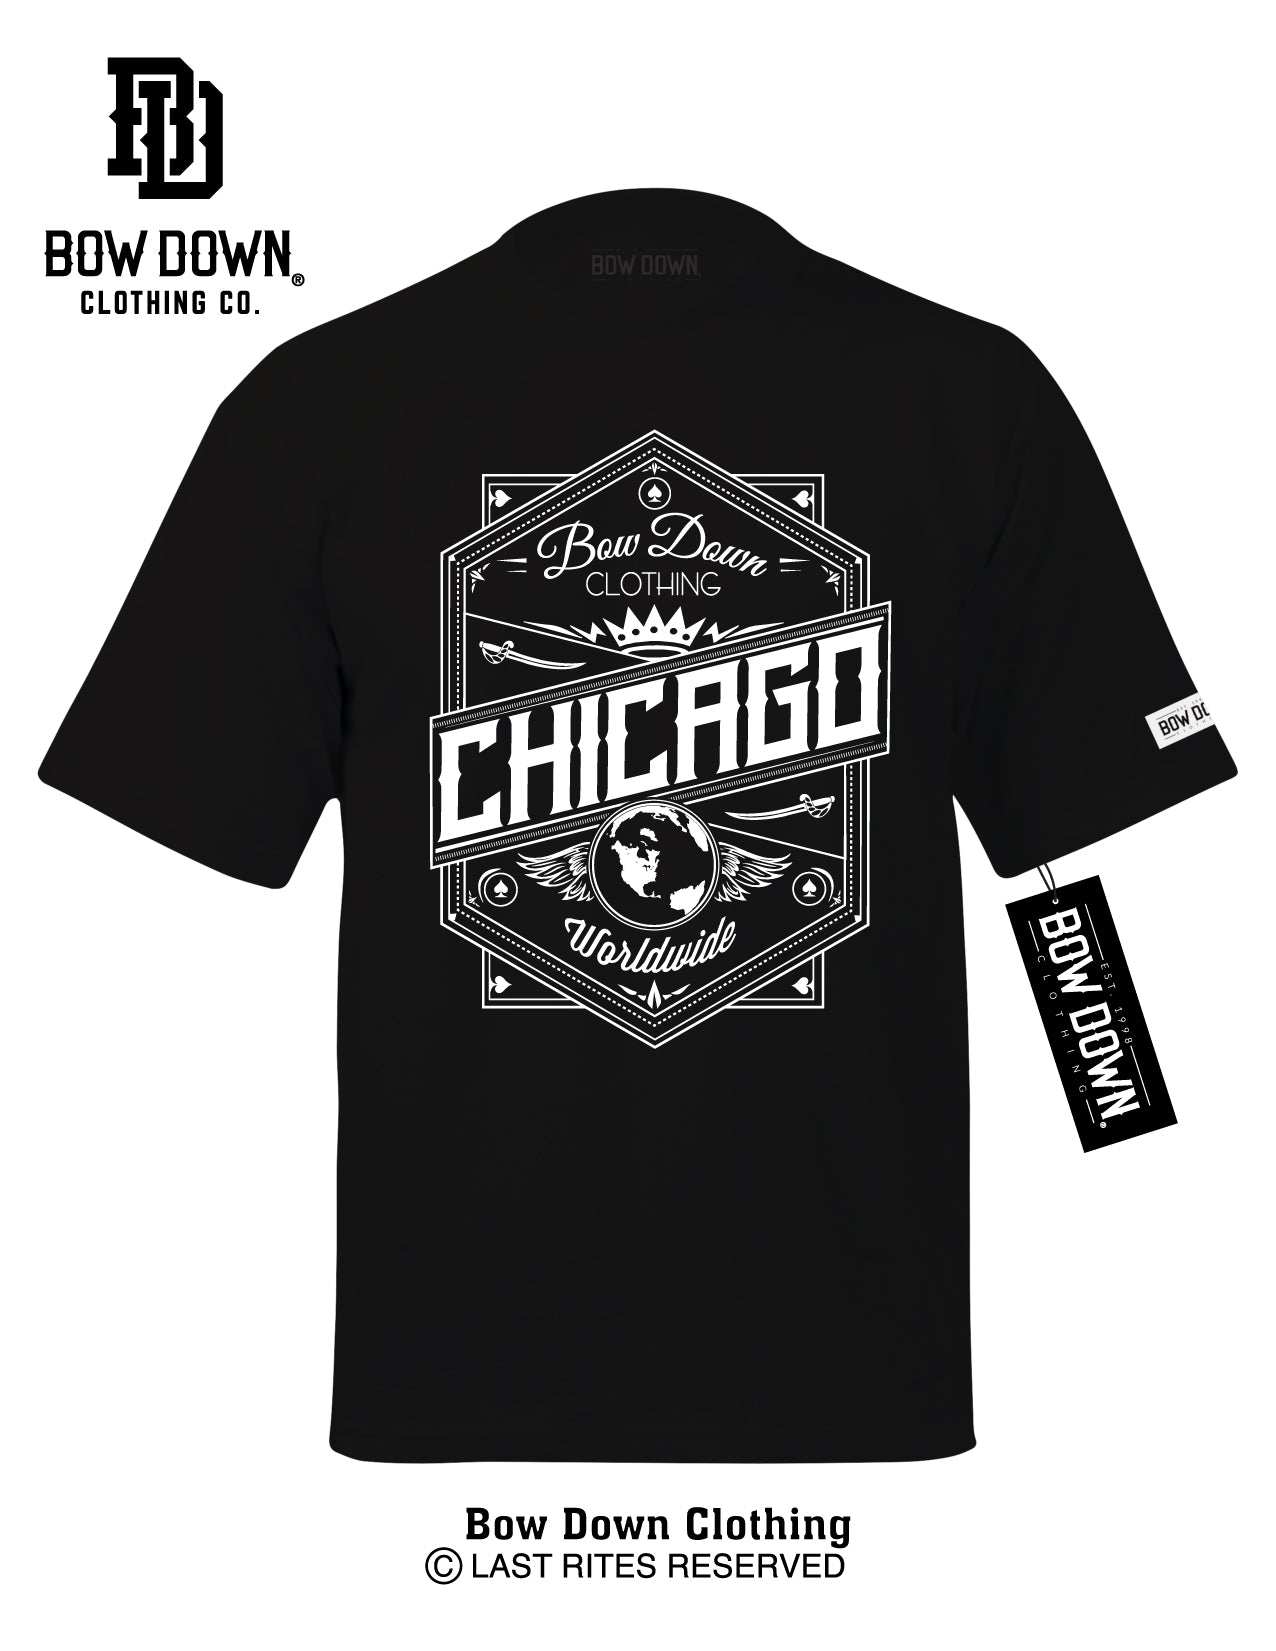 CHICAGO CROWN